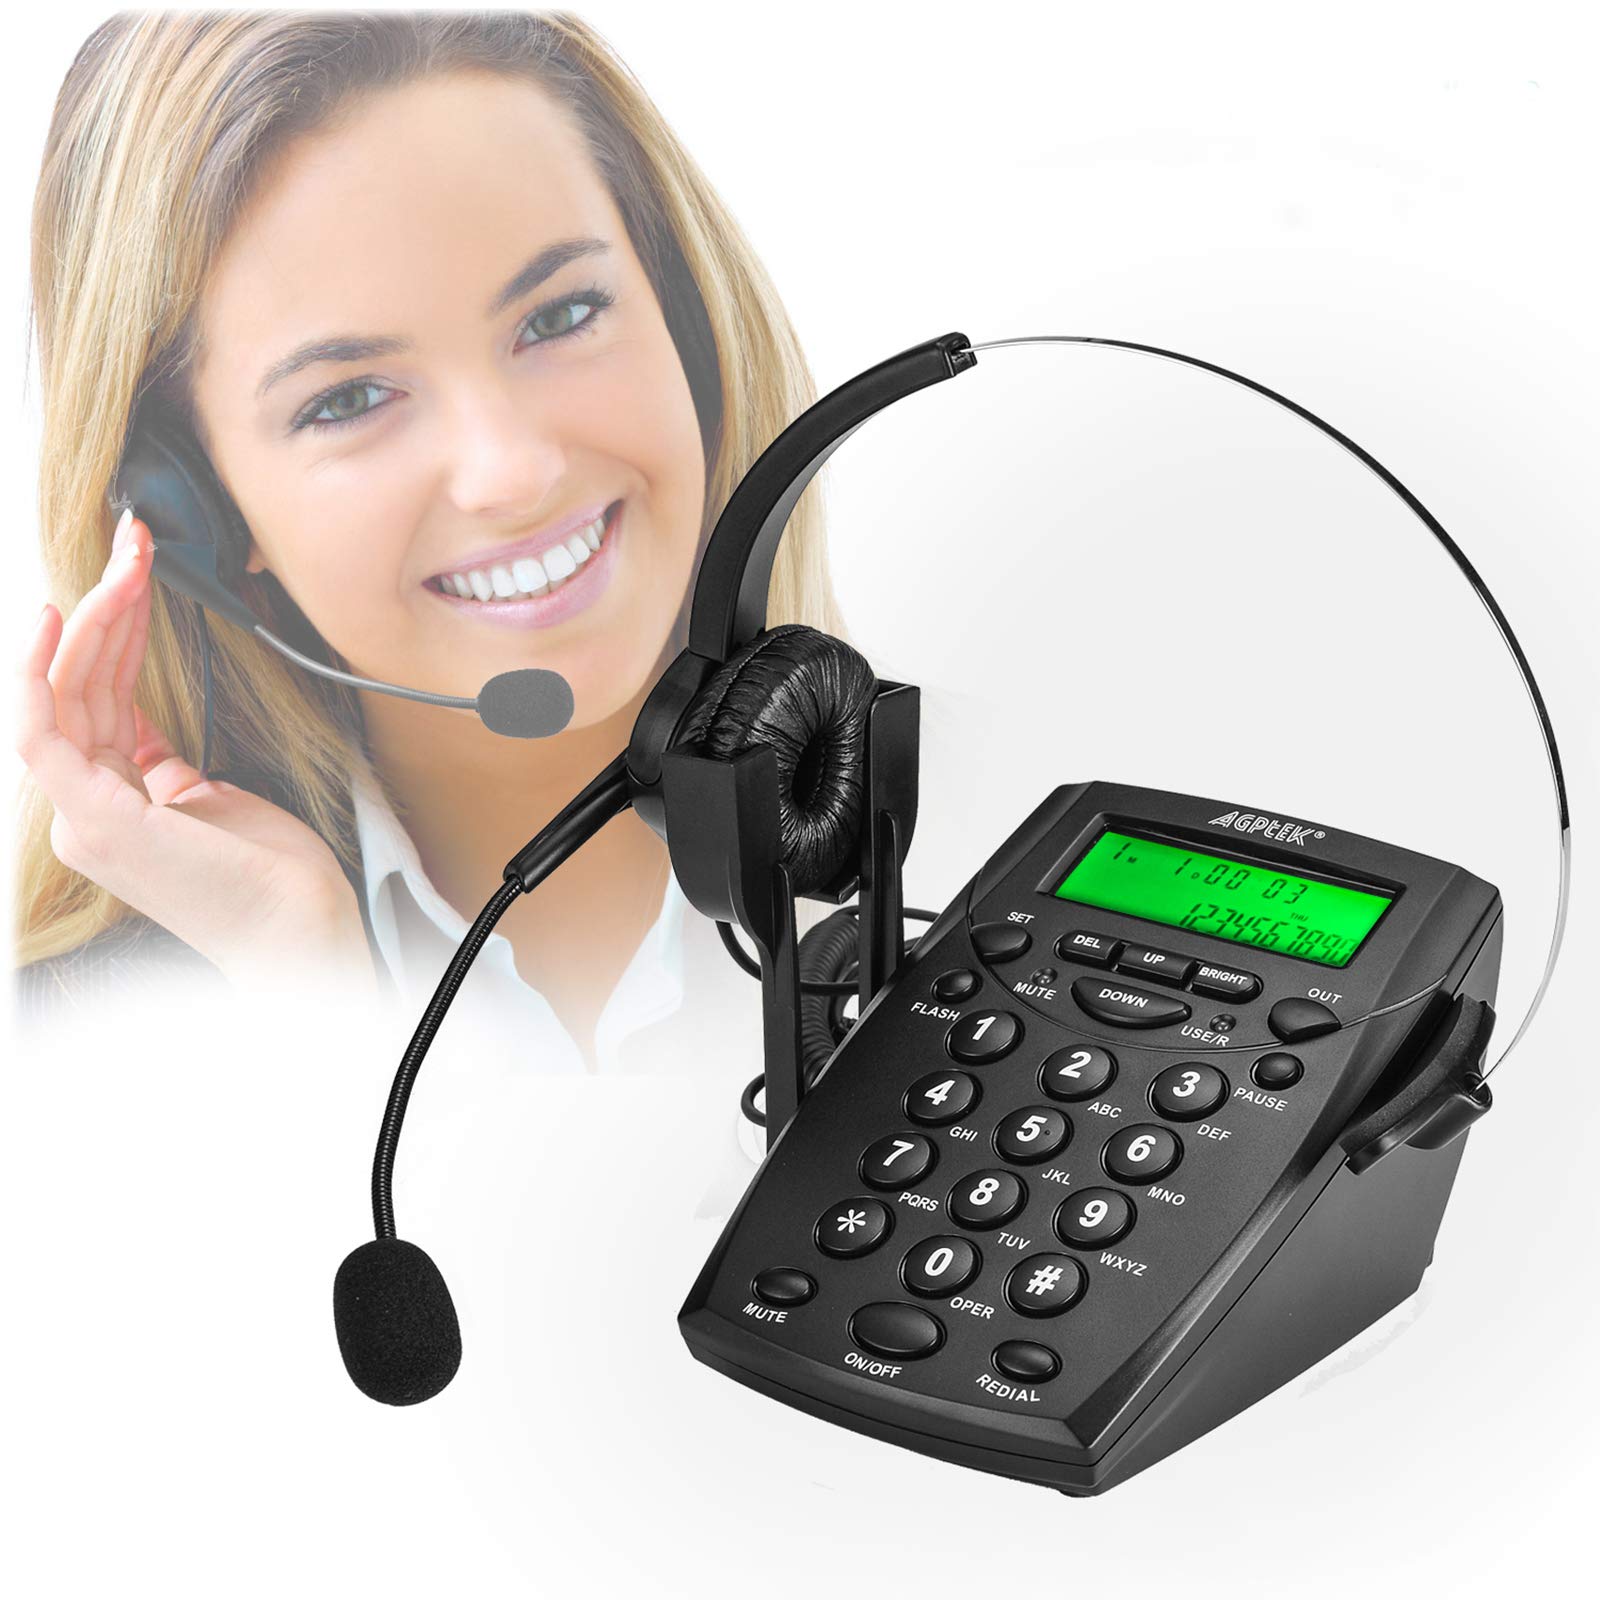 Book Cover AGPtek® Call Center Dialpad Headset Telephone with Tone Dial Key Pad & REDIAL Black